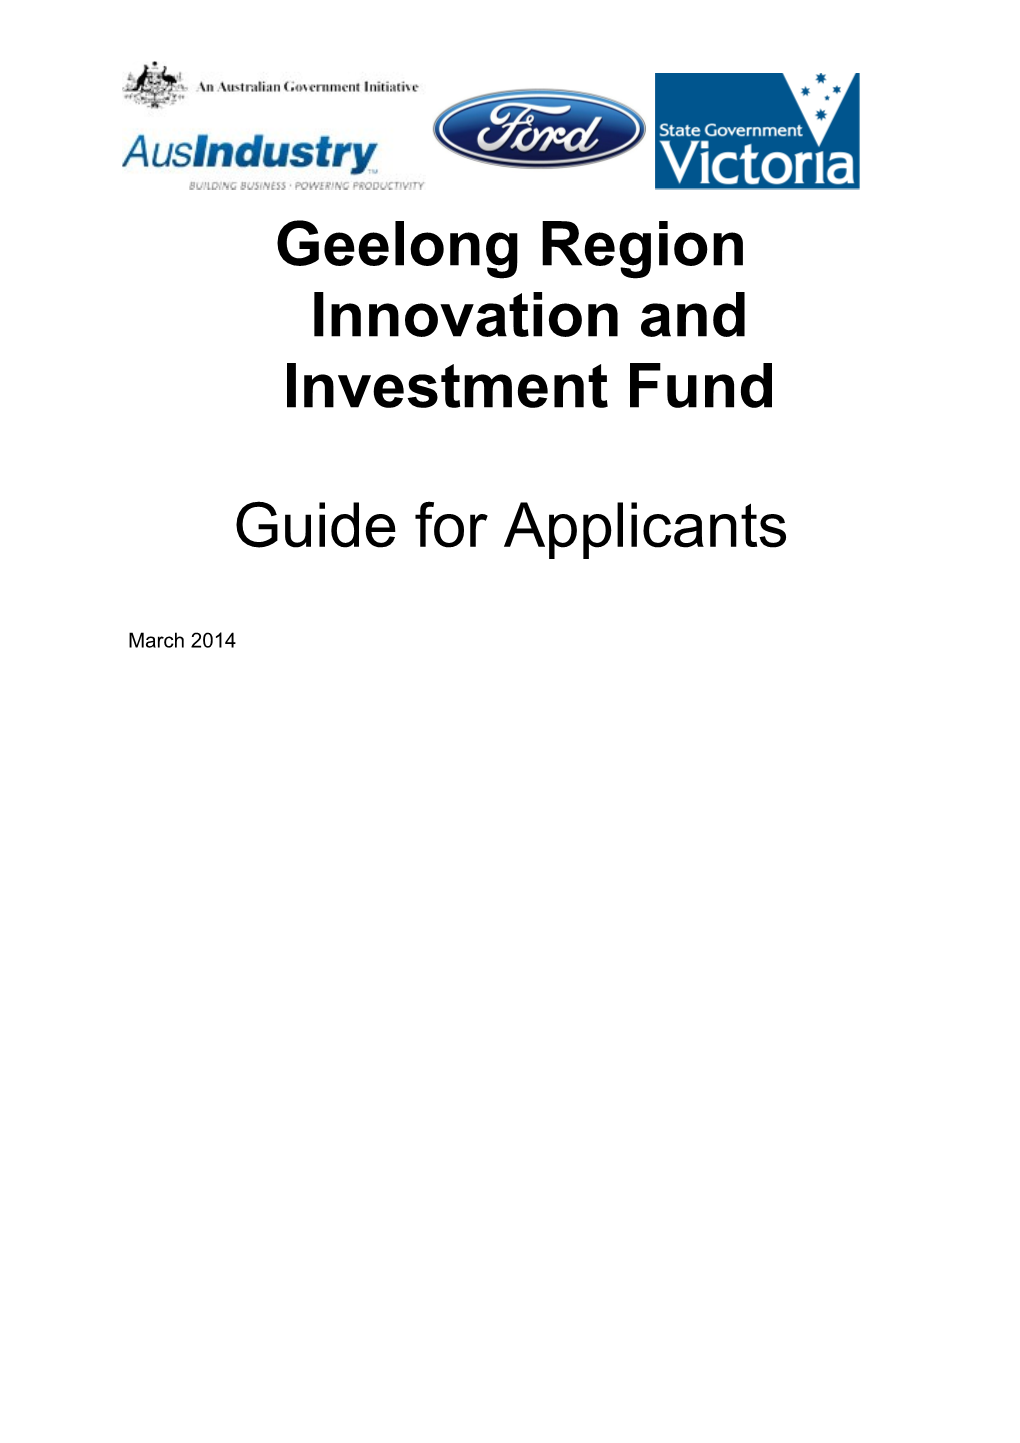 Geelong Region Innovation and Investment Fund - Applicant Guide